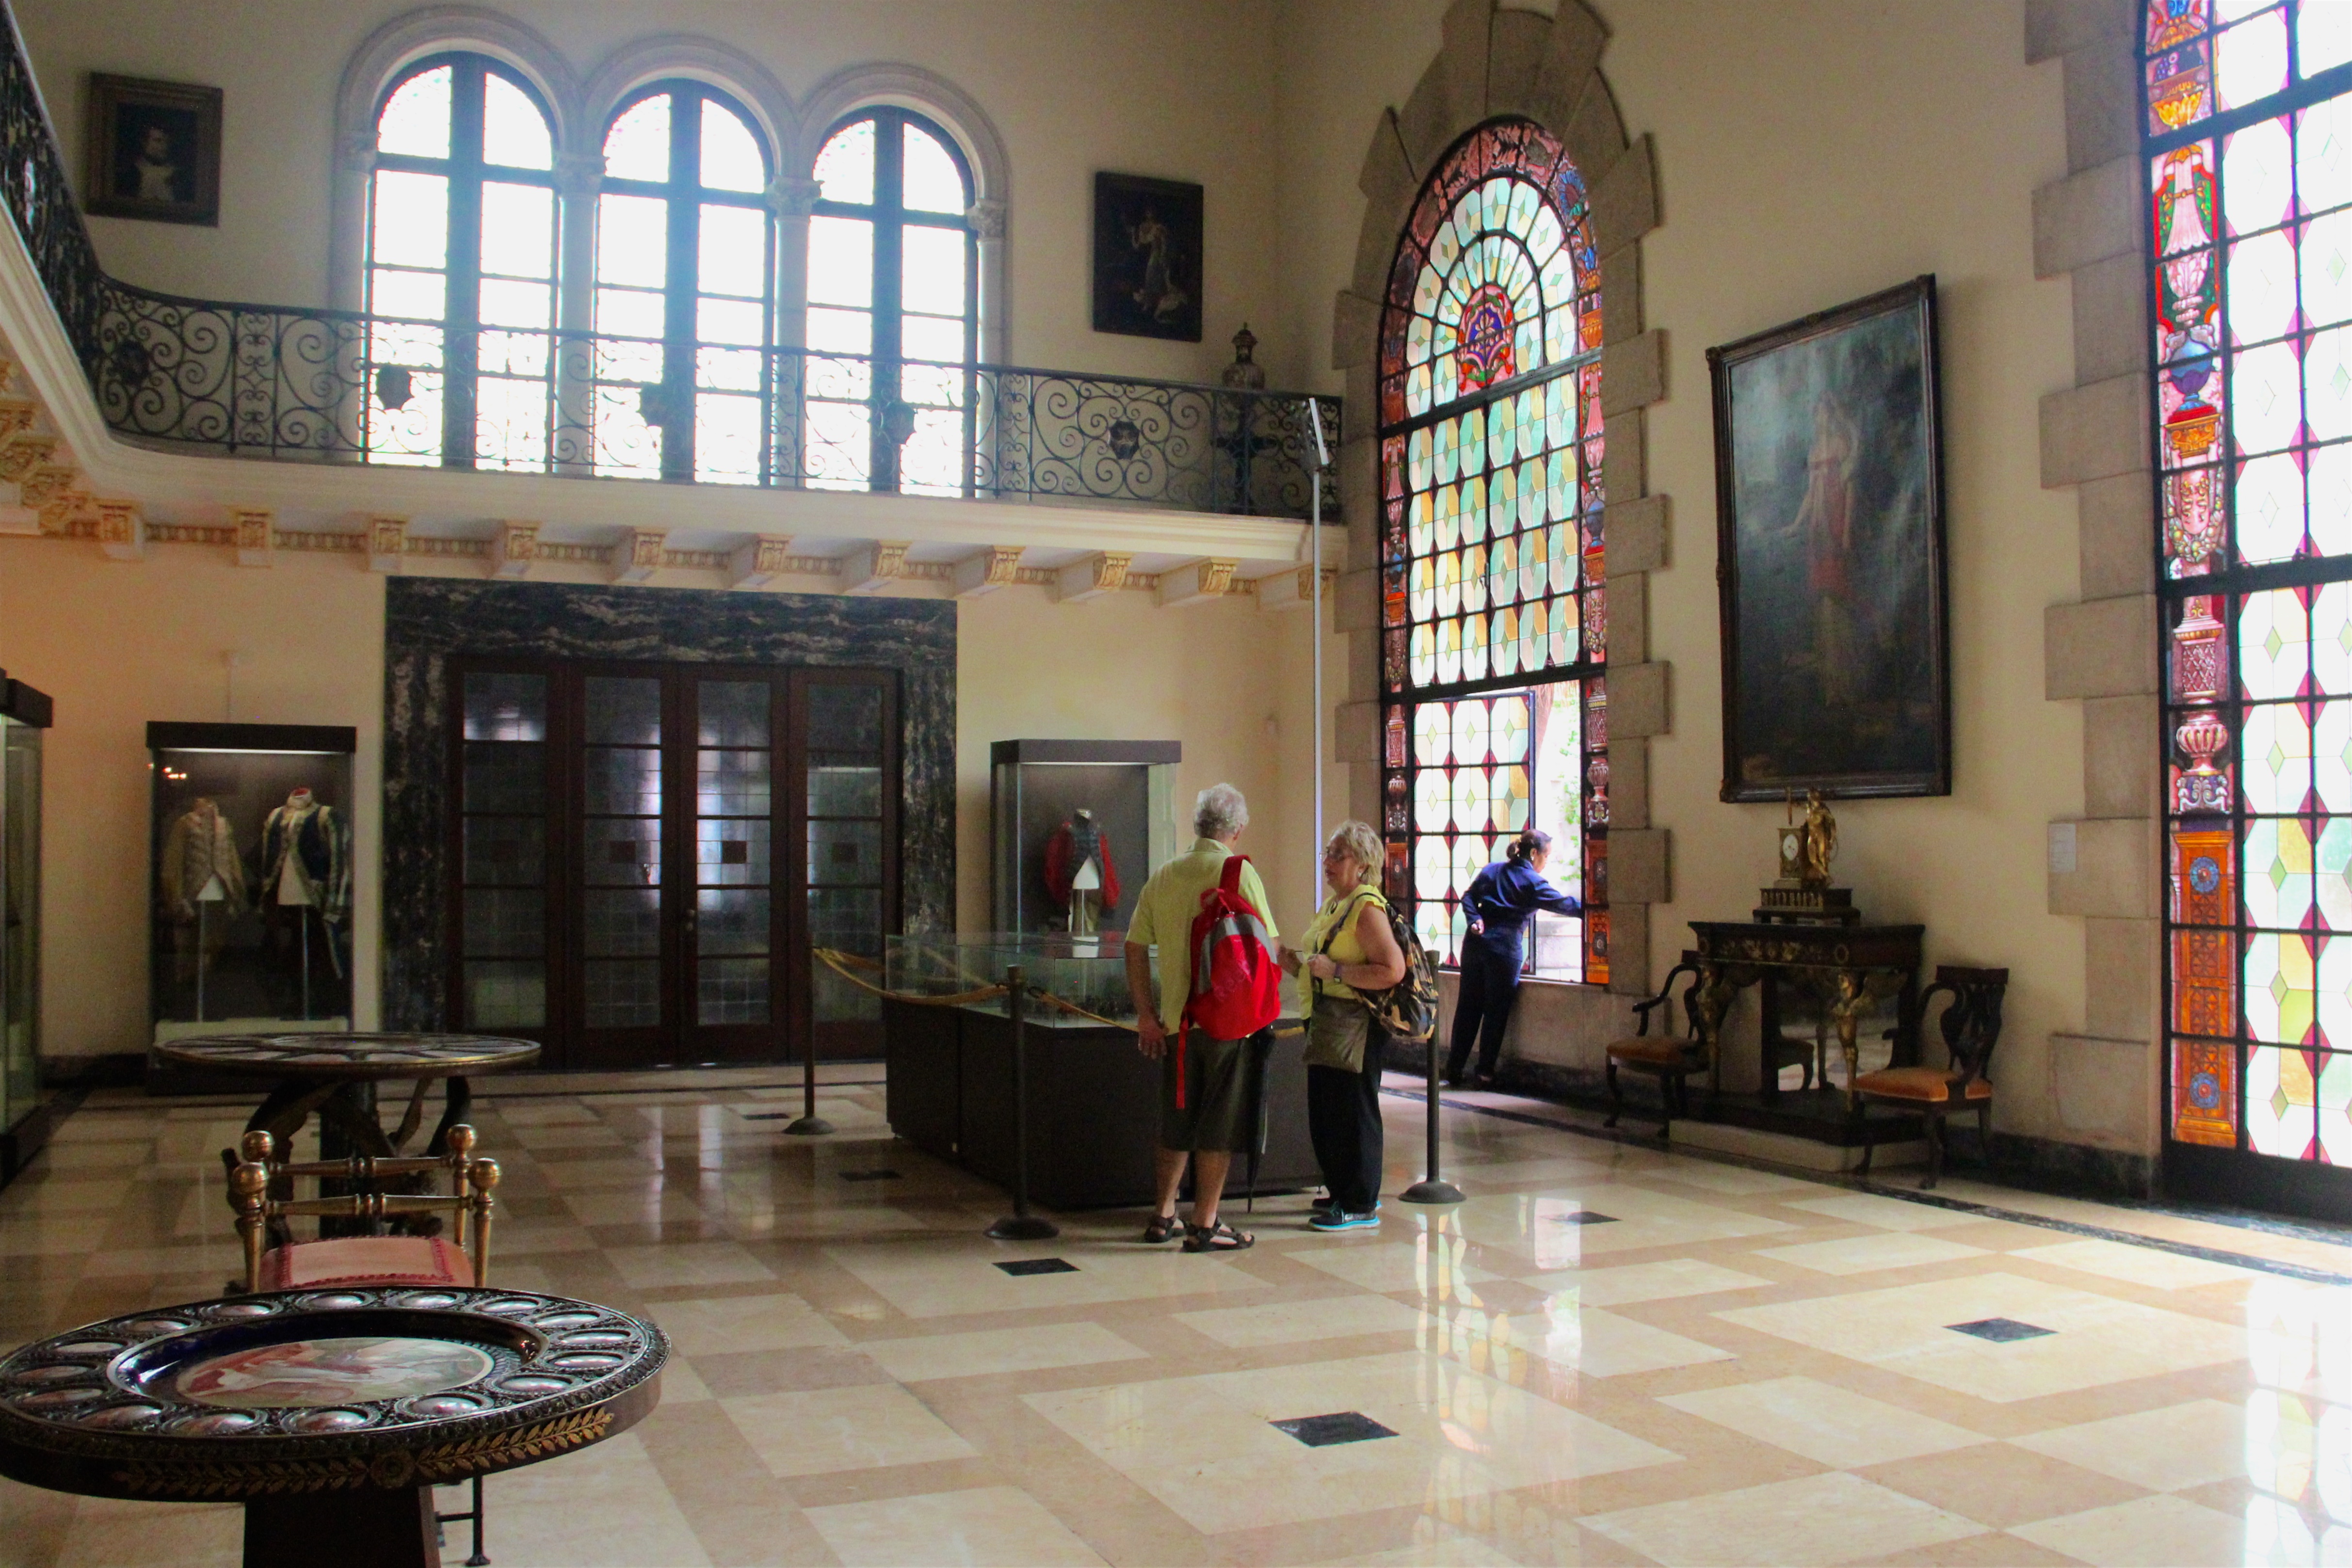 Grand salon of the Museo Napoleónico in Havana, Cuba, photo by Margaret Rodenberg, 10-2017 Finding Napoleon in Cuba